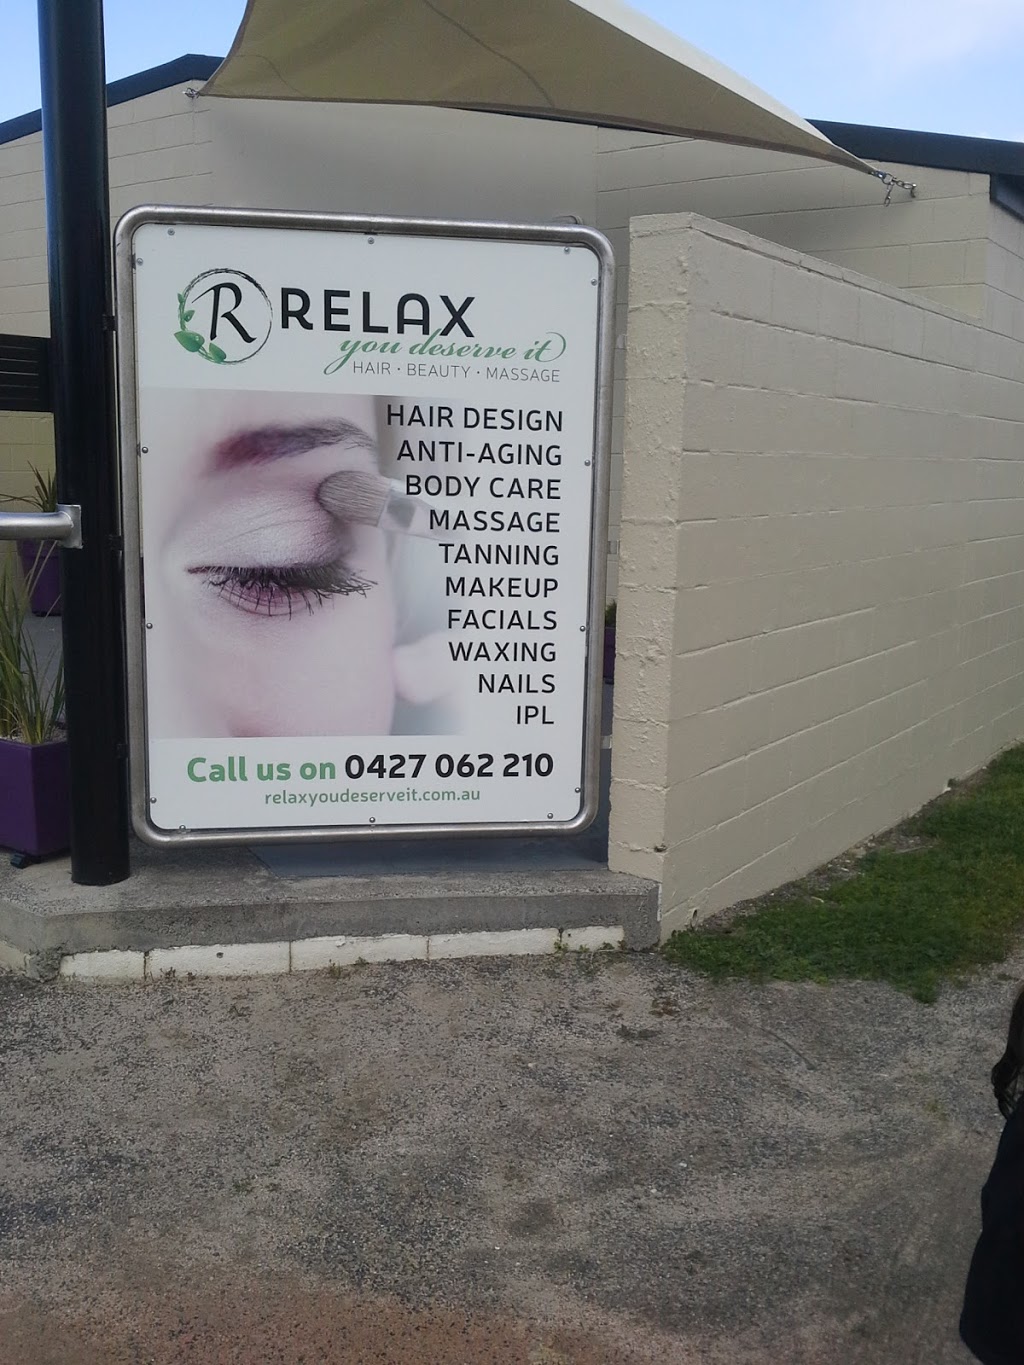 Relax ...you deserve it! Beauty and Massage | 7 Pendrigh Pl, St Helens TAS 7216, Australia | Phone: 0427 062 210